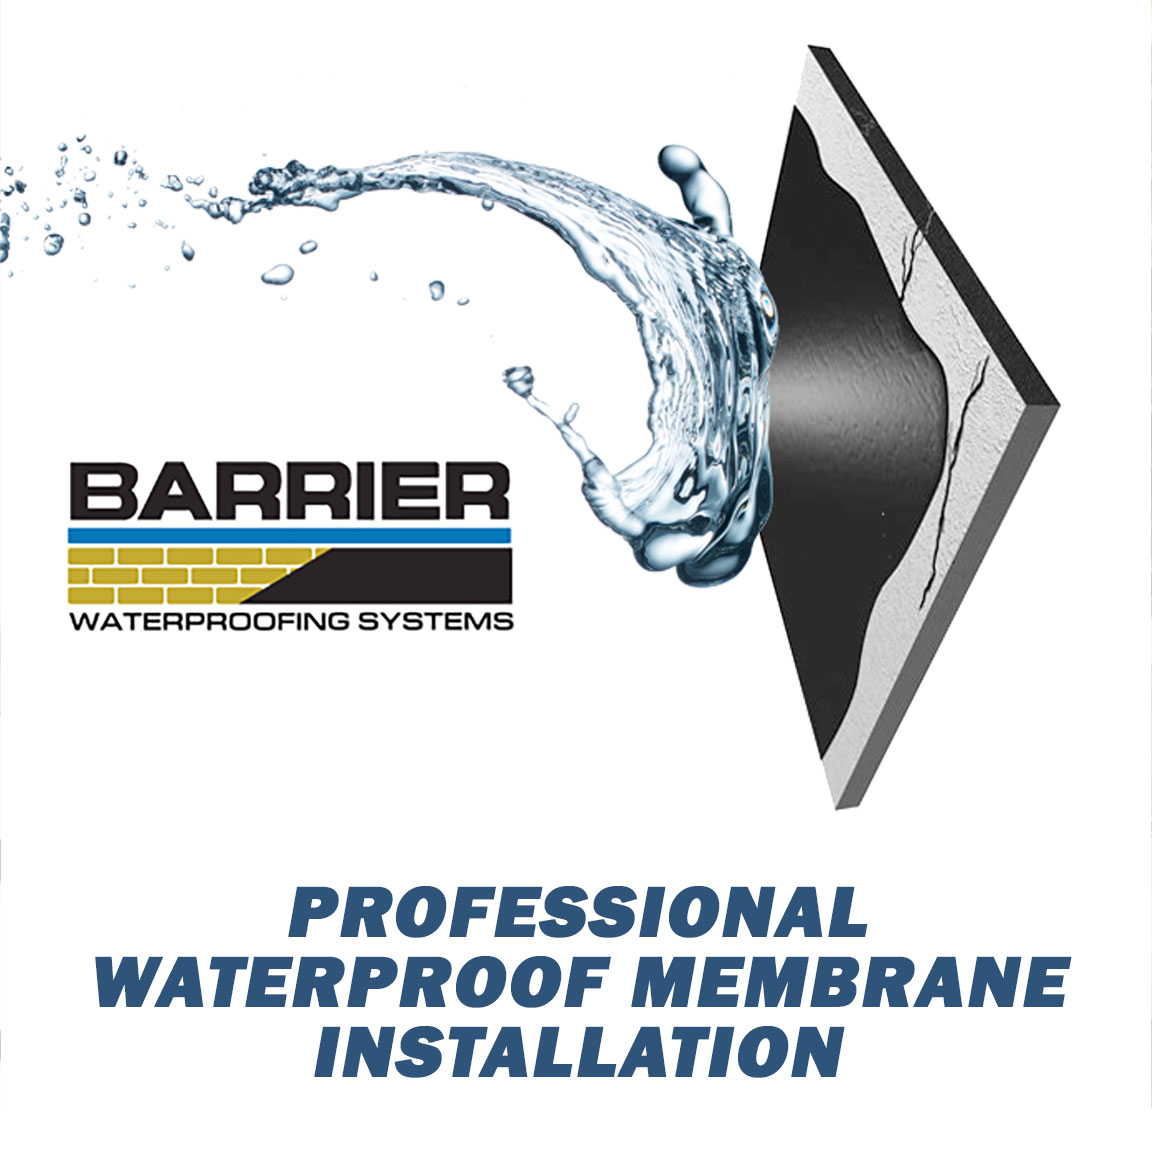 Illustraition of professional waterproof membrane installation repelling water